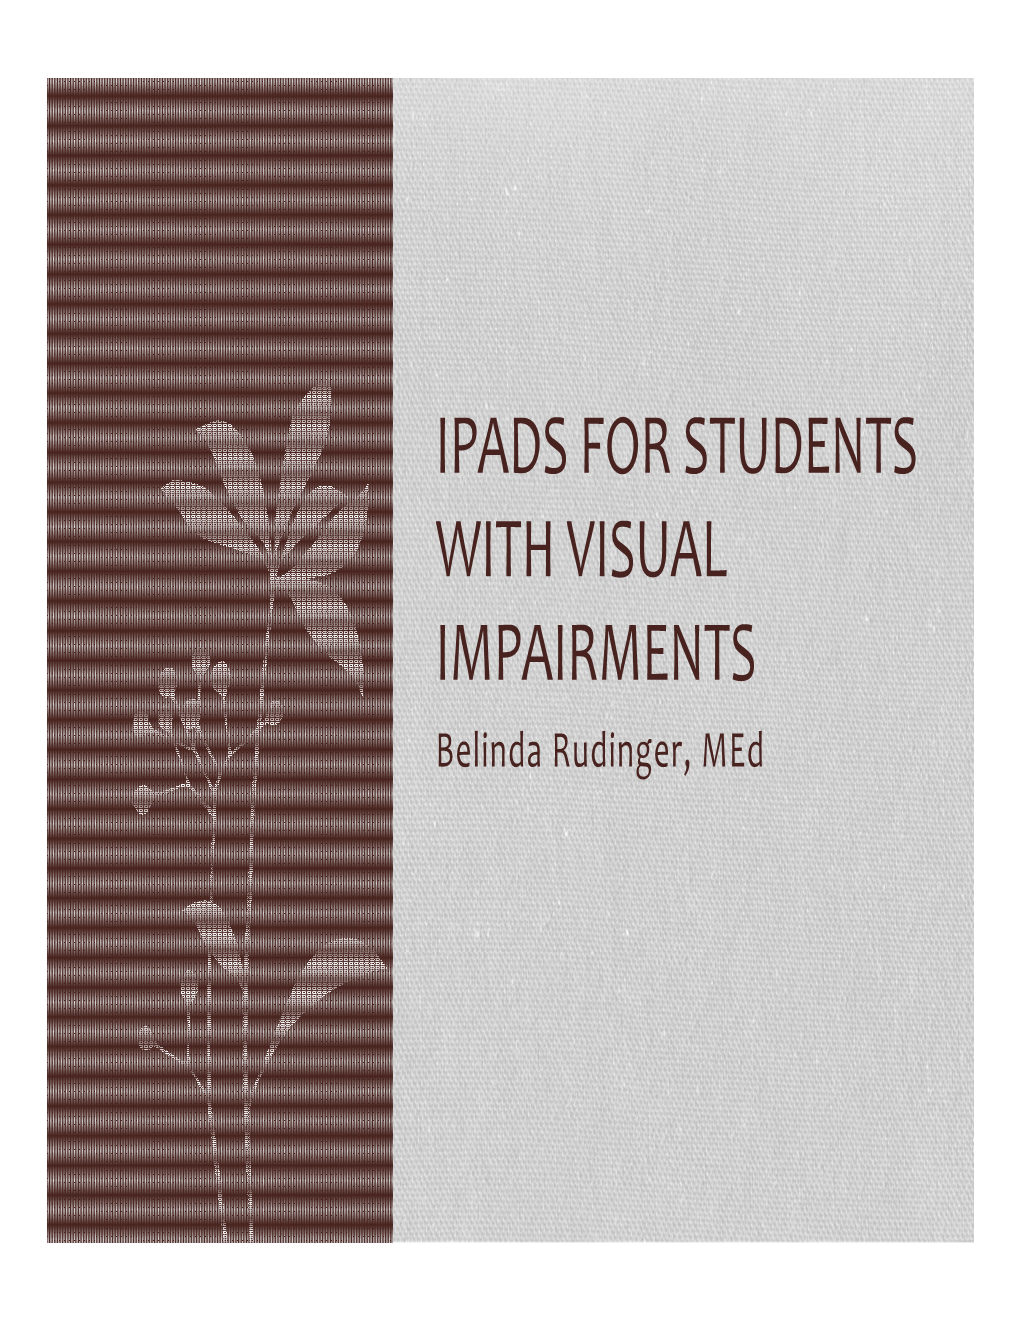 Ipads for Students with Visual Impairments.Pdf